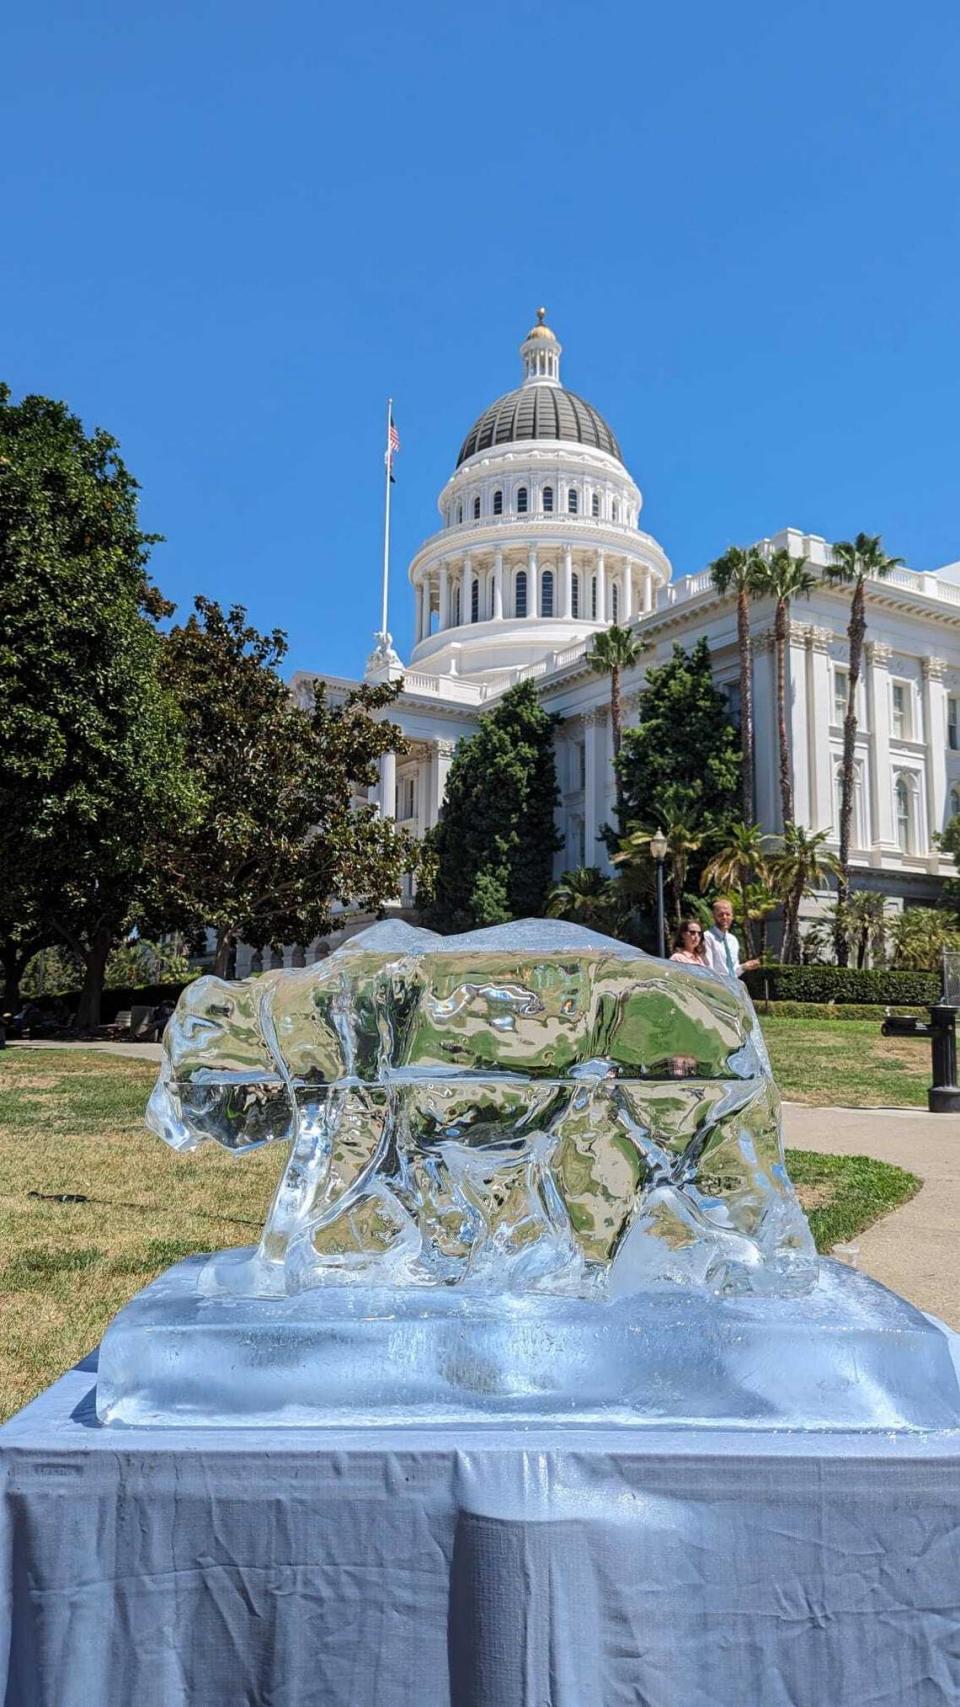 An ice sculpture of a California bear melts outside the capitol on Thurs. August 17. Advocates and lawmakers say a package of laws to encourage clean home cooling is needed to fight climate change.